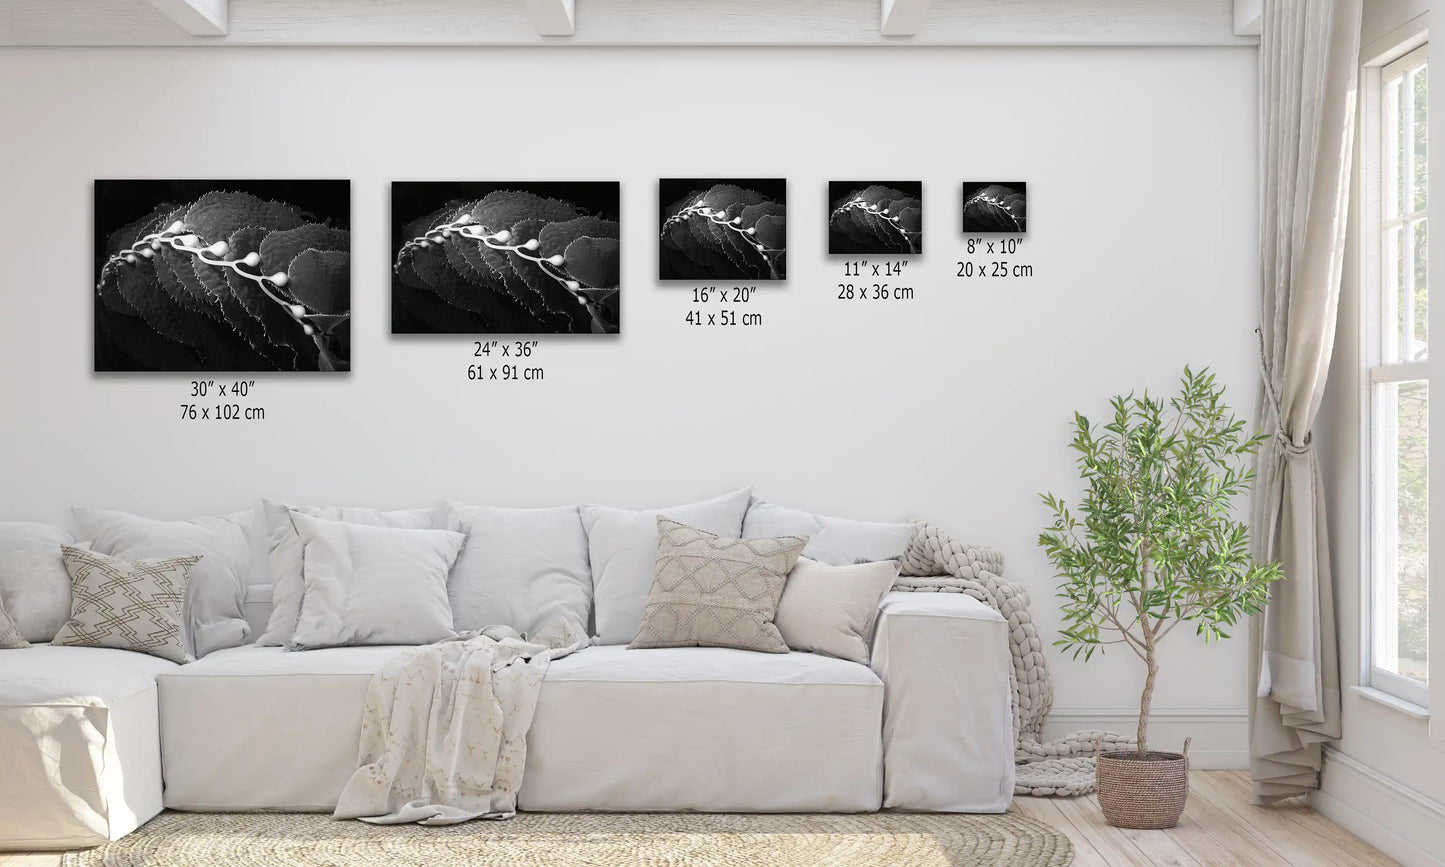 A series of black and white underwater kelp art canvases in various sizes displayed over a sofa.